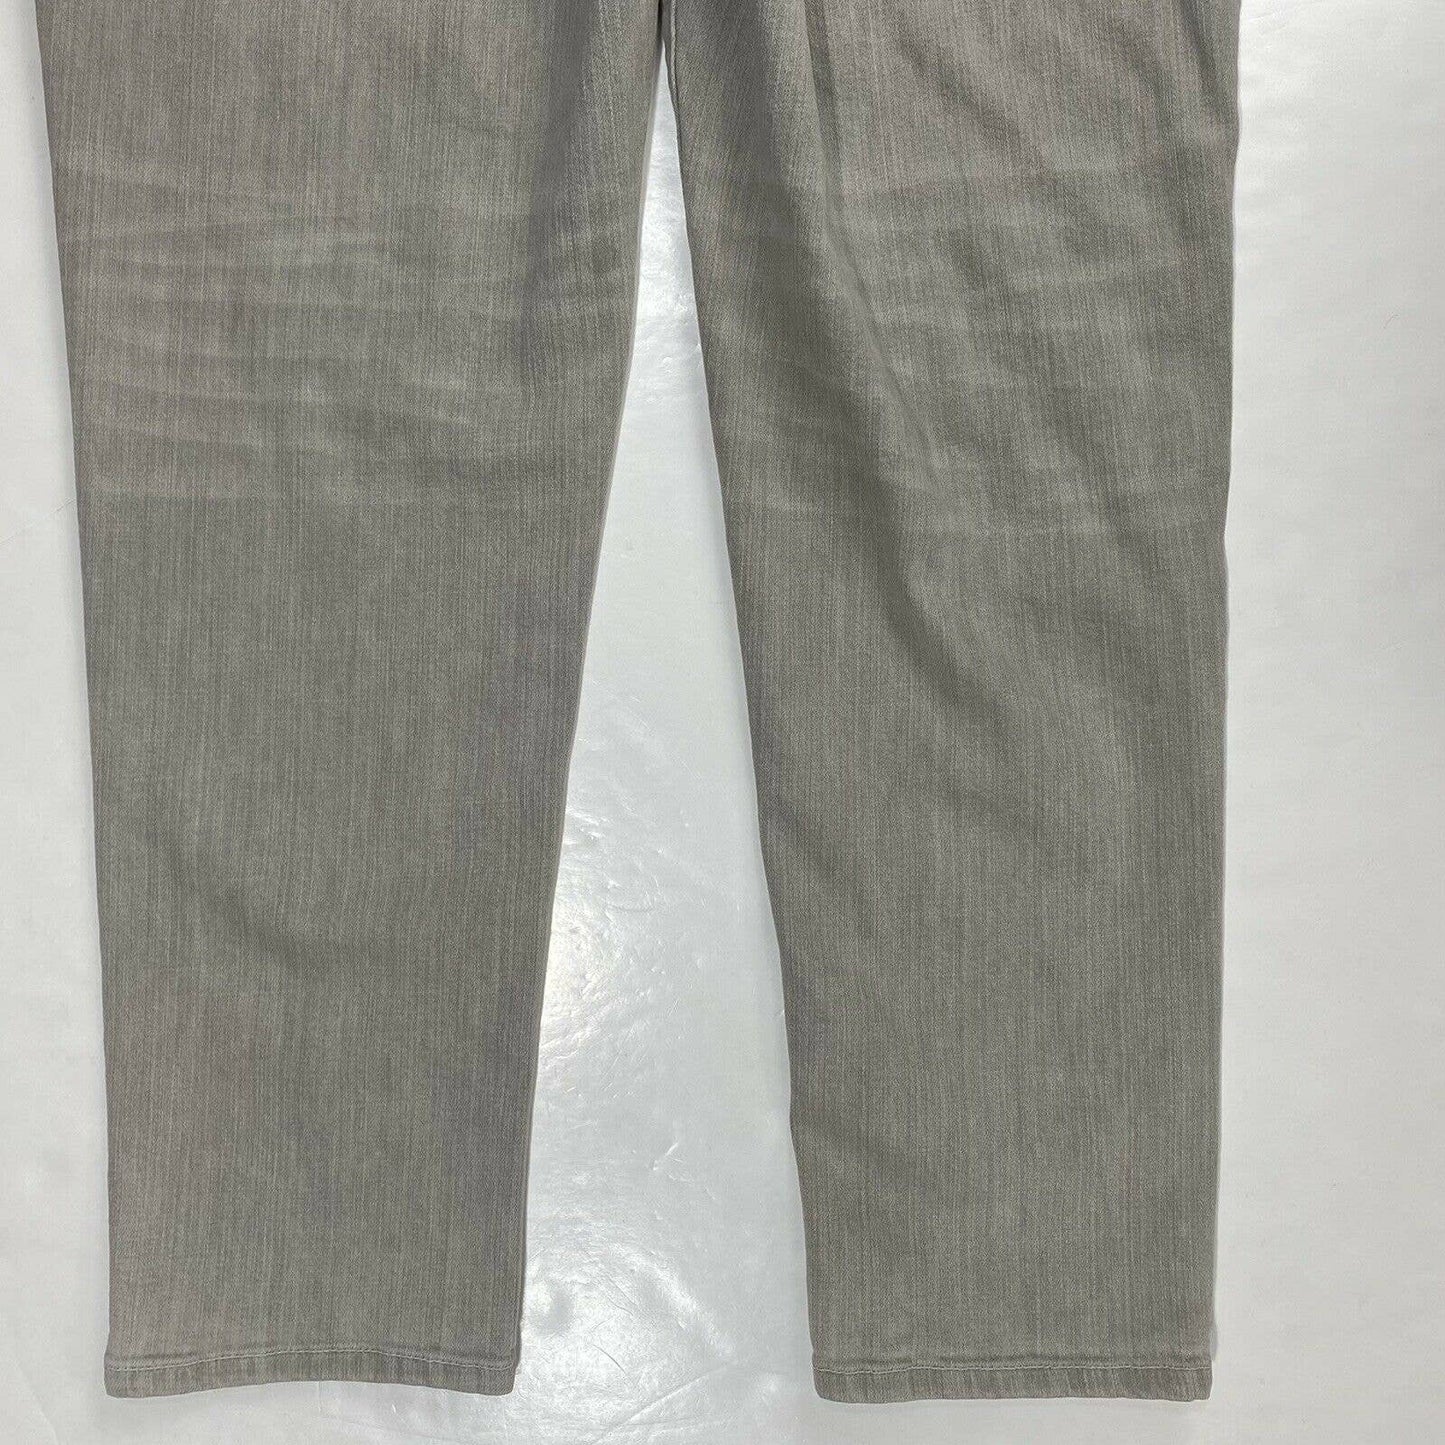 Eileen Fisher Tapered Ankle Sz 12 Midrise Light Gray Denim Jeans Organic Cotton